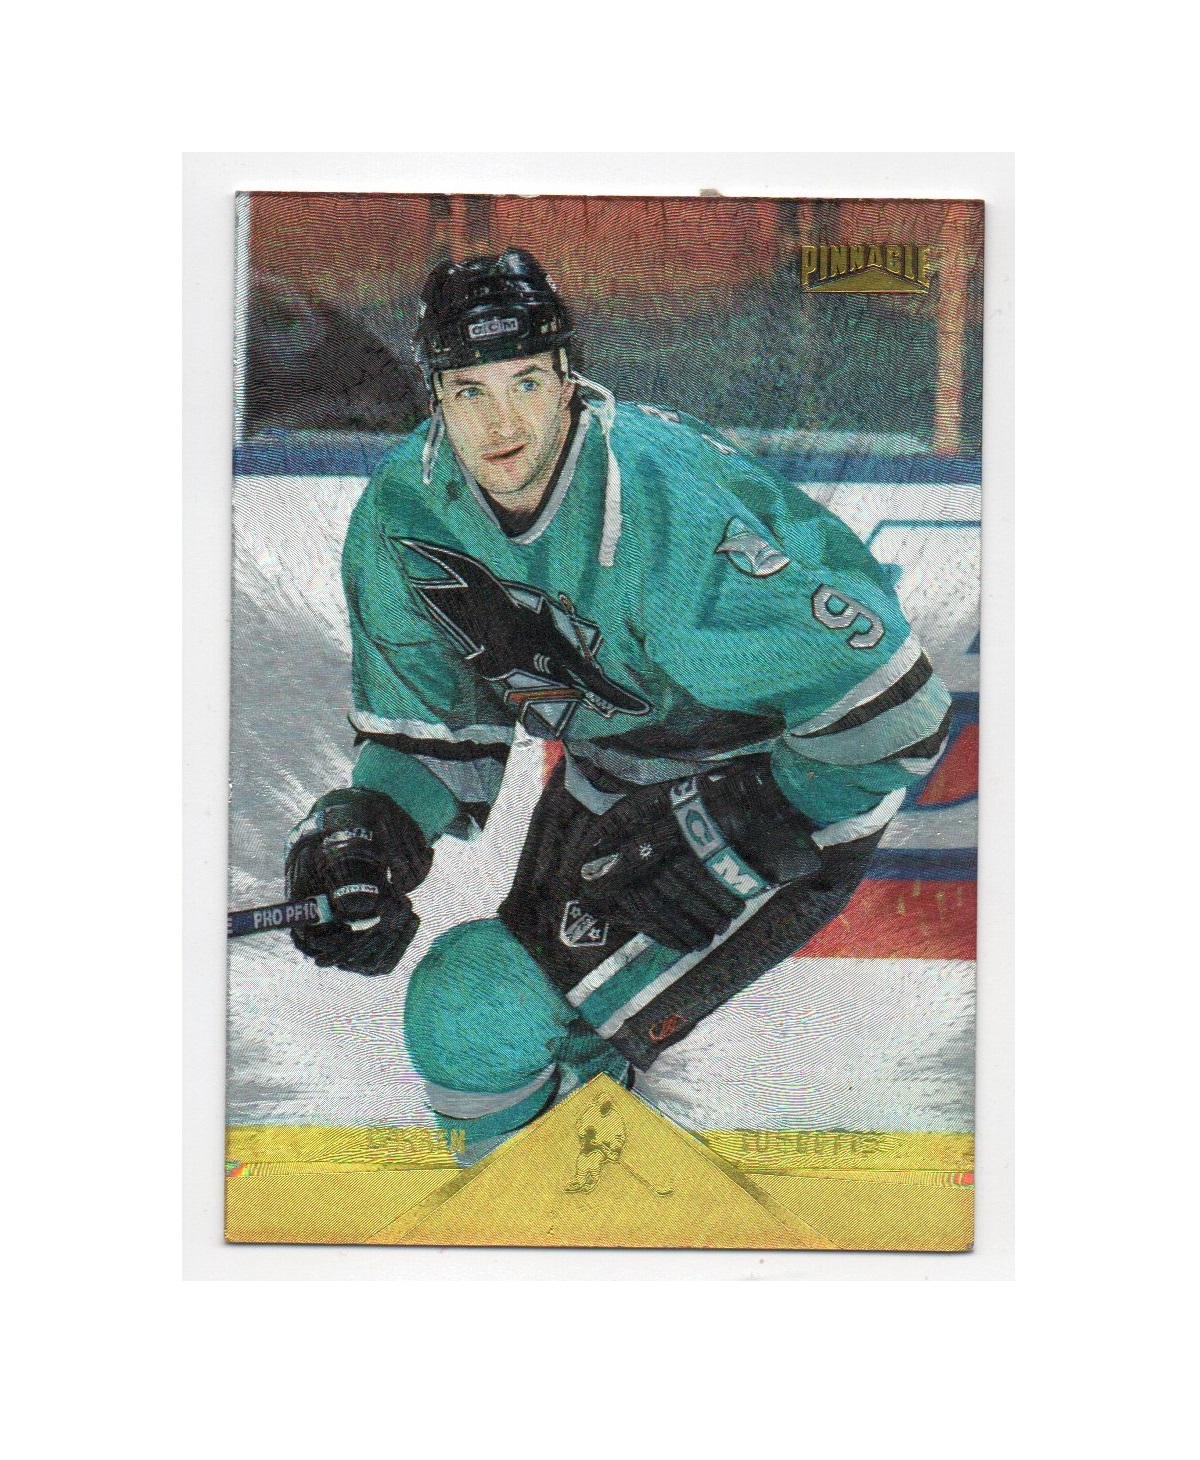 1996-97 Pinnacle Rink Collection #165 Darren Turcotte (10-X210-SHARKS)